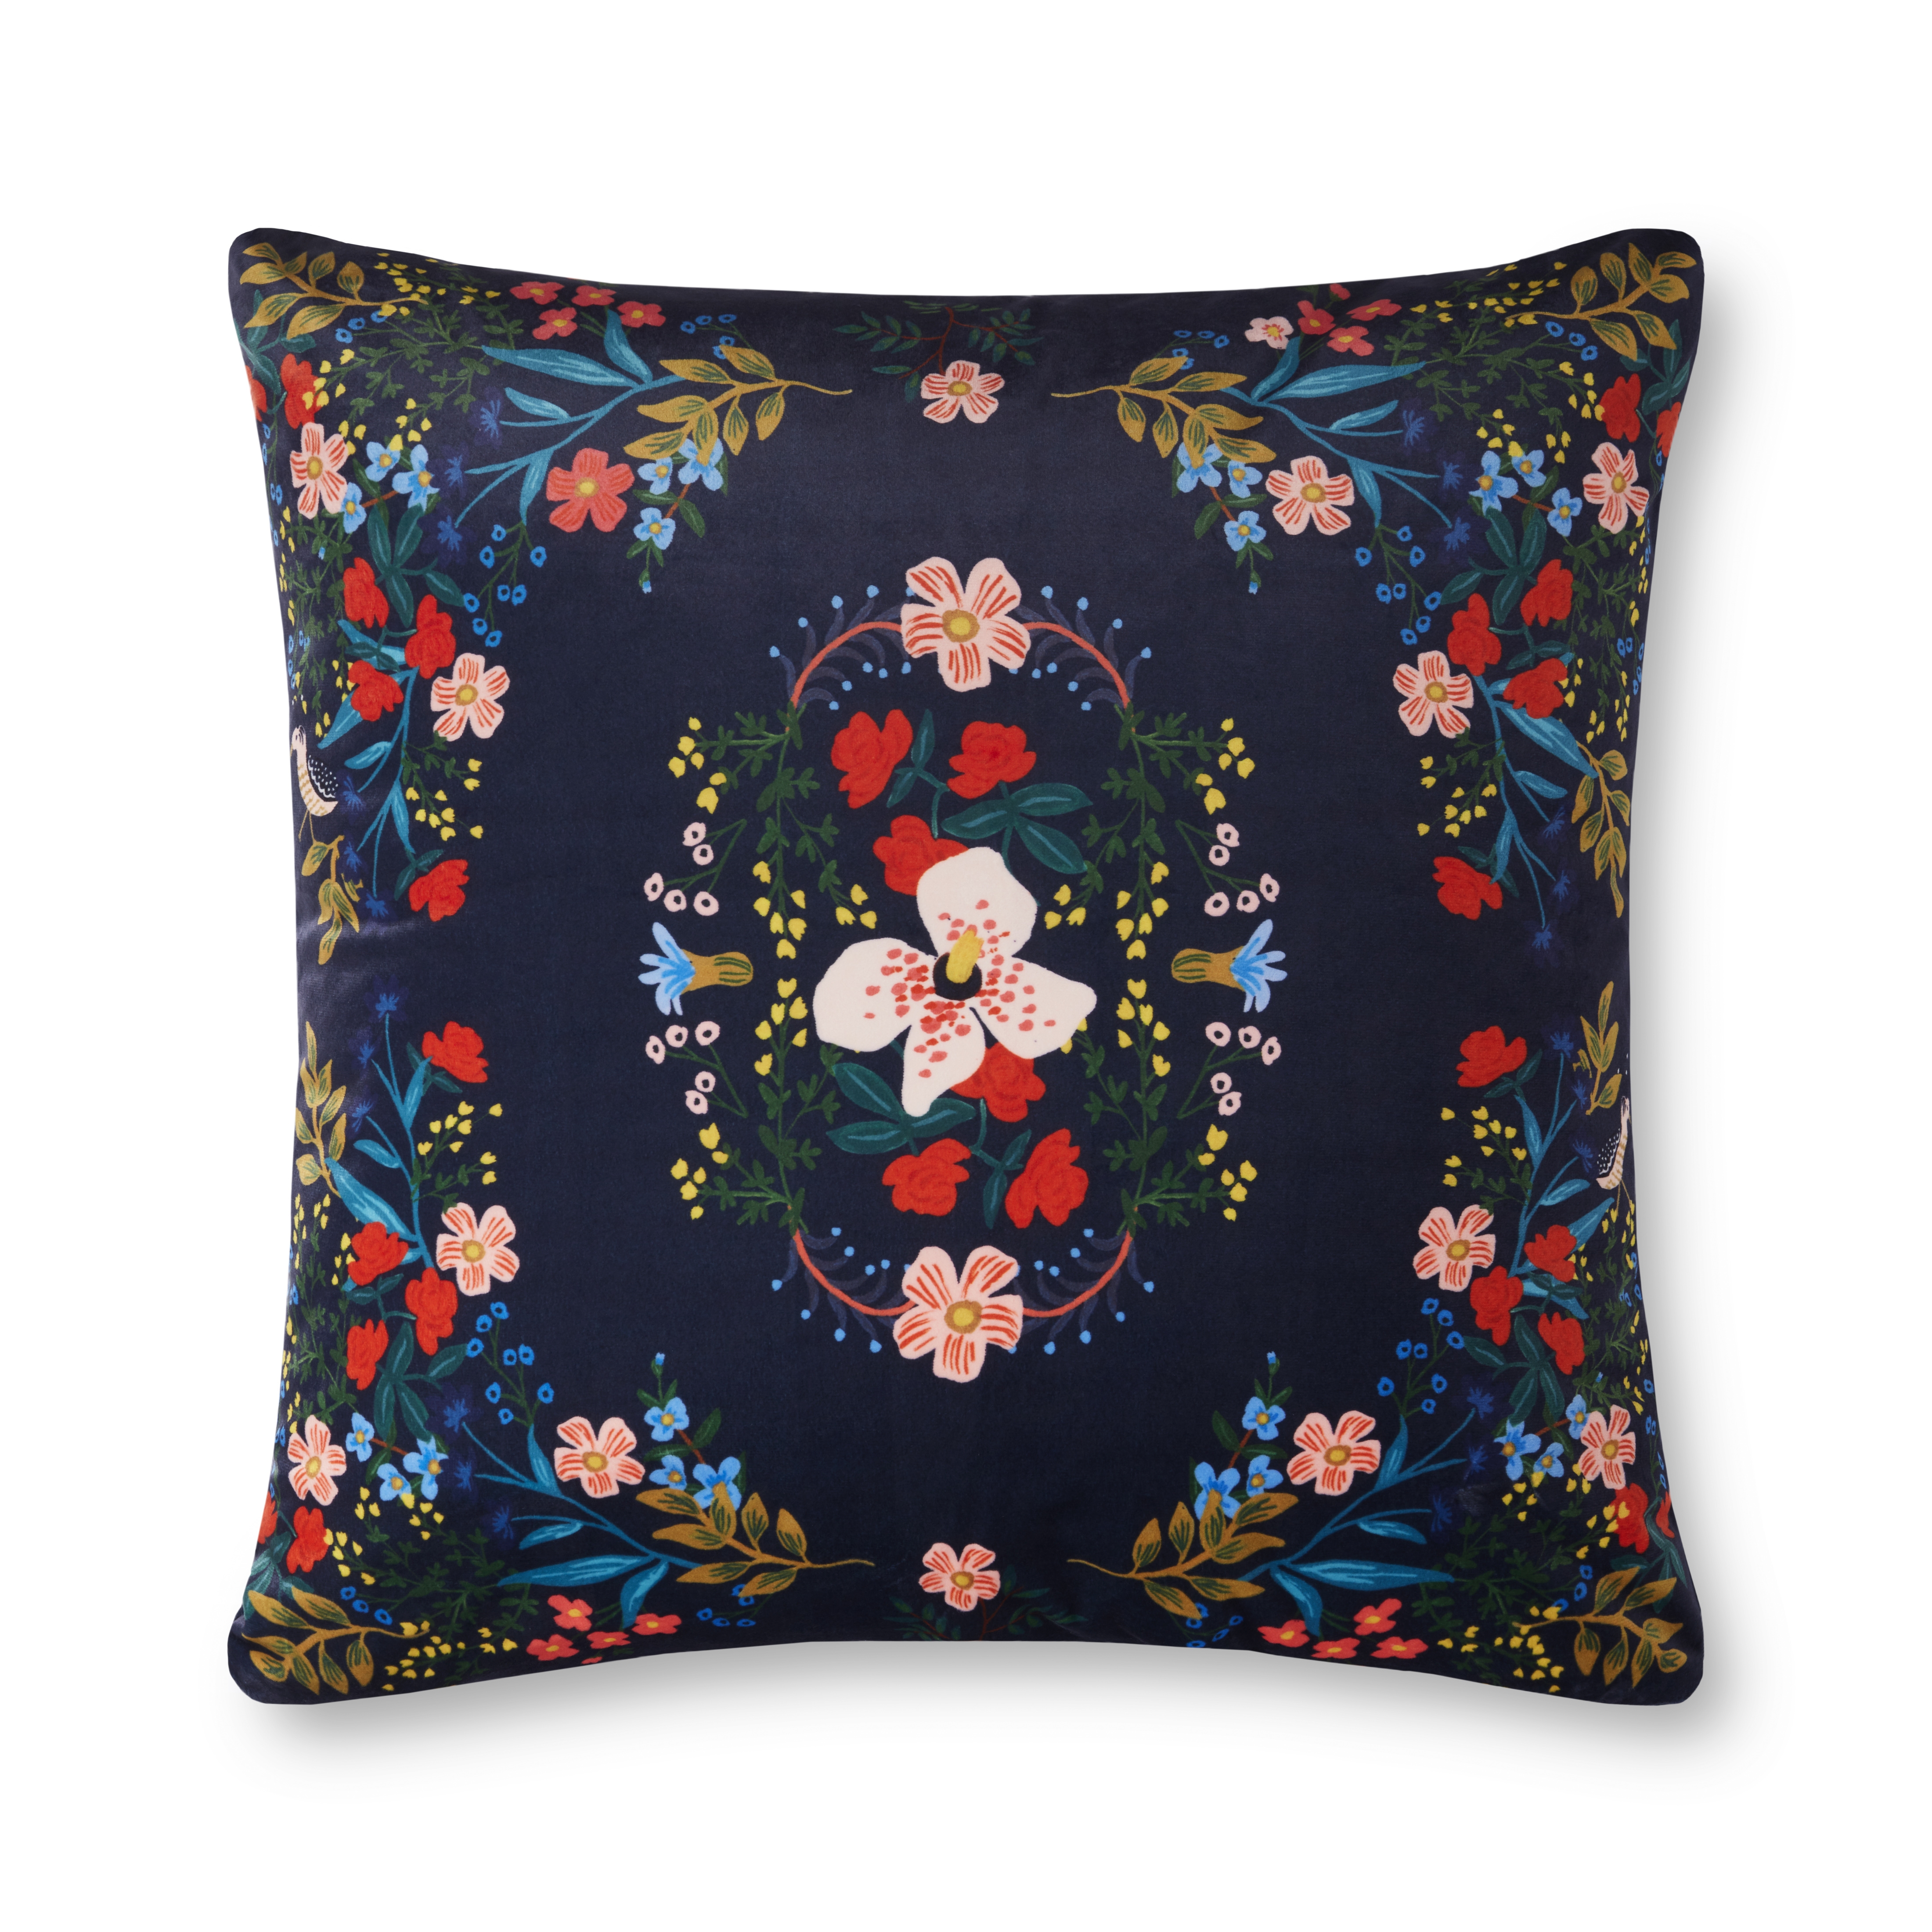 Rifle Paper Co. x Loloi PILLOWS P6058 NAVY / MULTI 22" x 22" Cover Only - Image 0